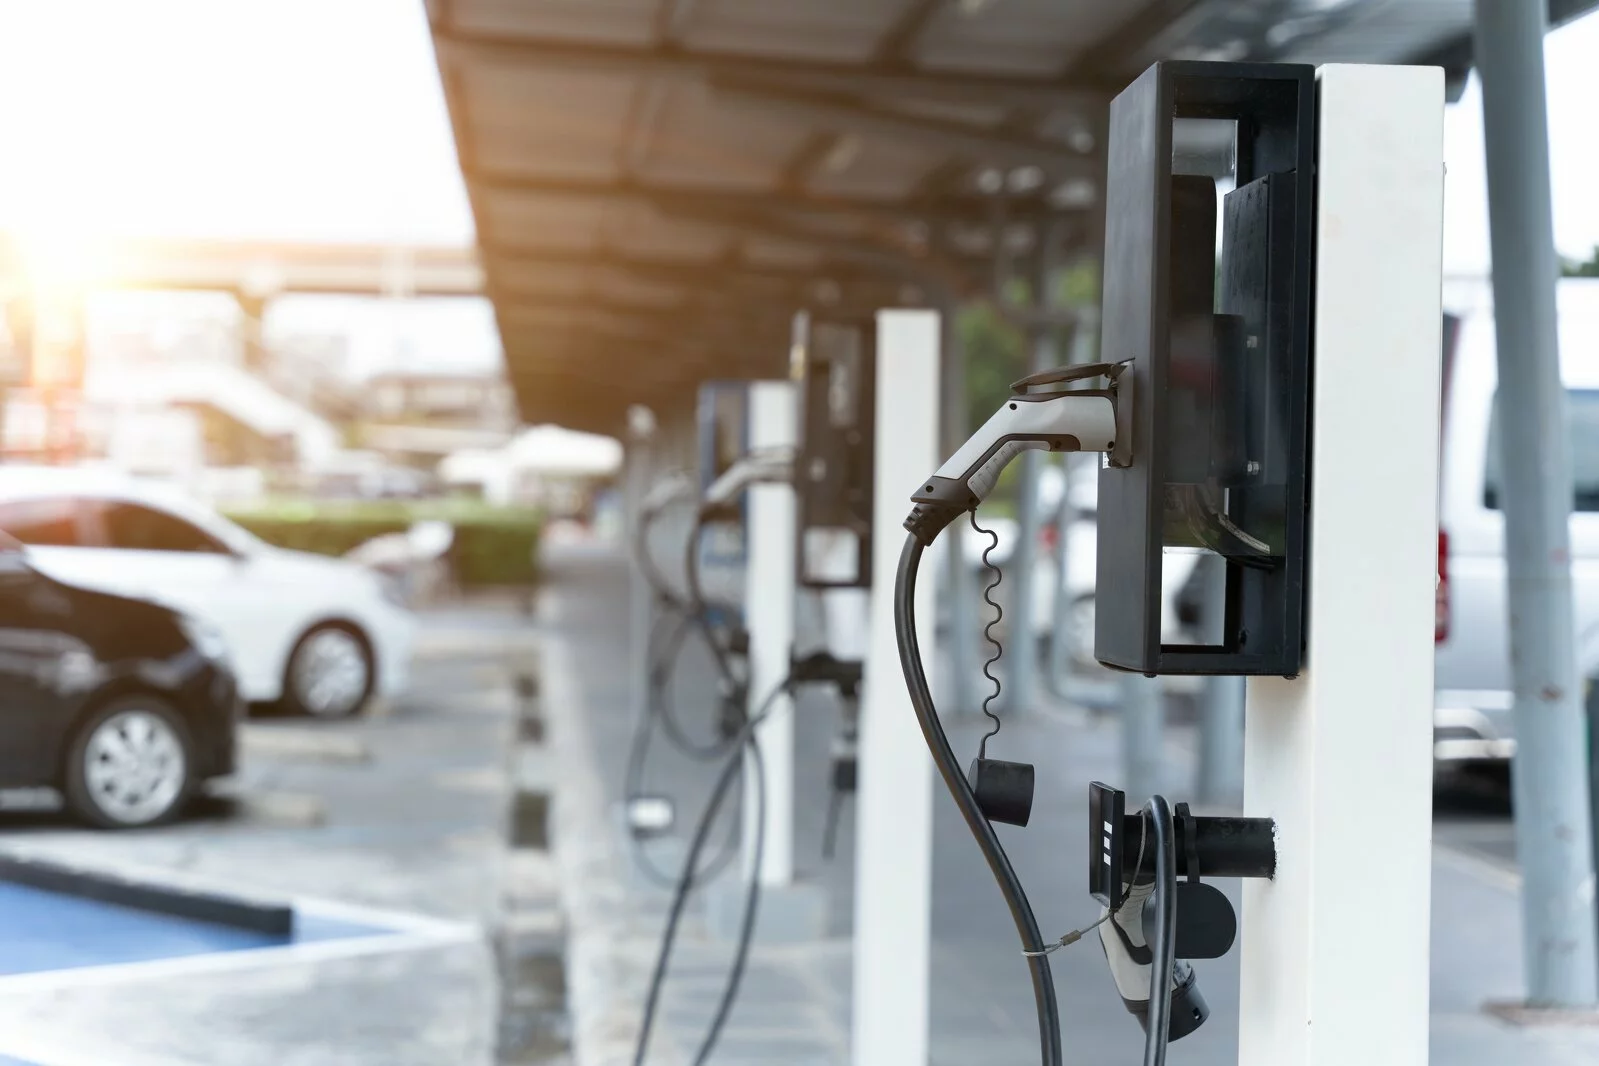  2023/09/Electric-car-on-electric-car-charging-station-shutterstock_2182997921.jpg 